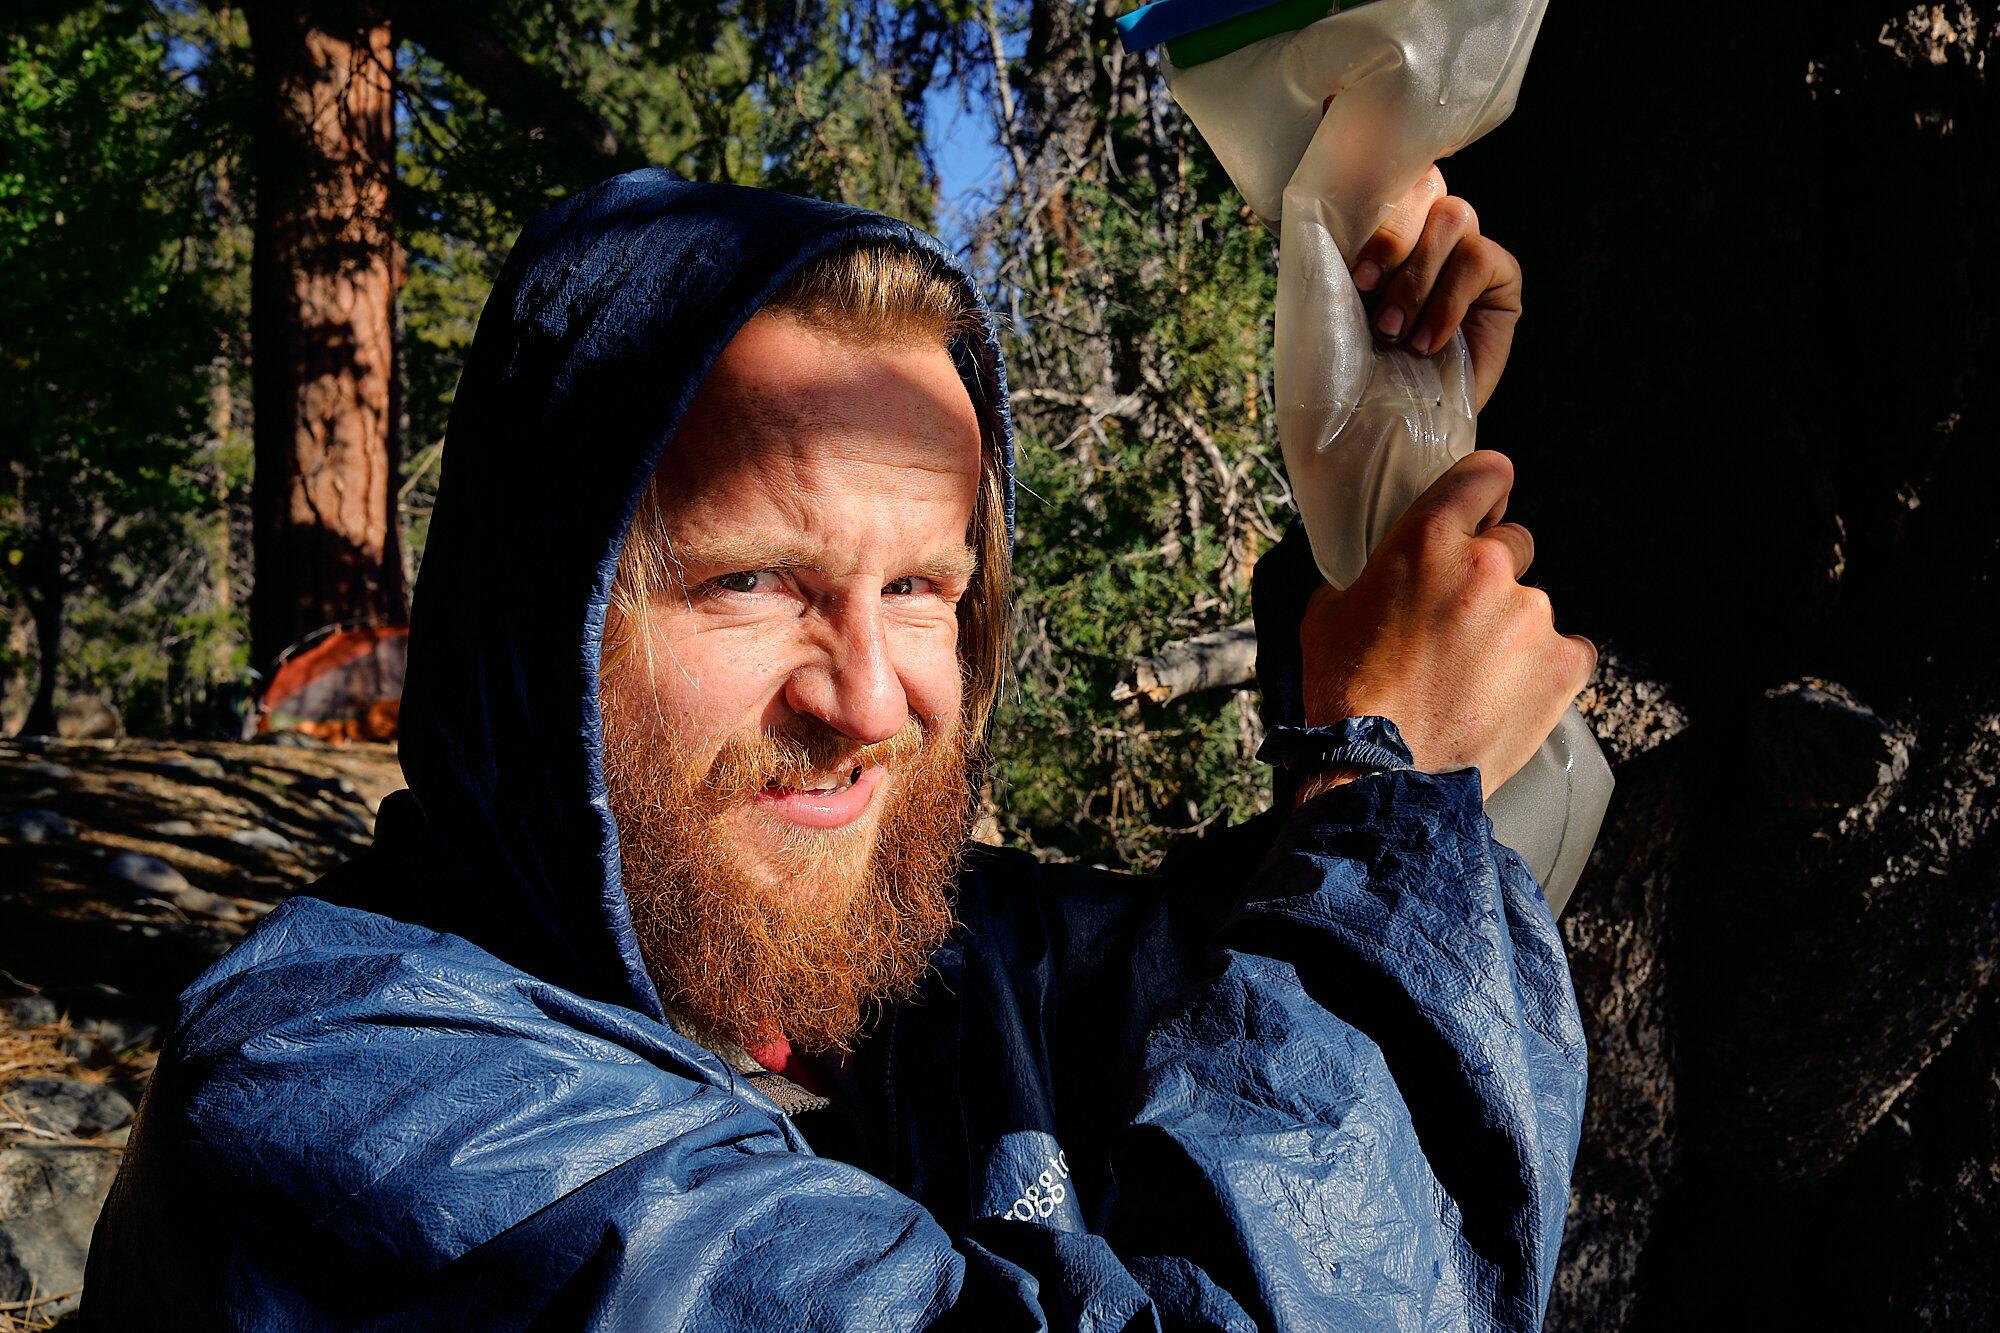  Lebowski disgruntled that he had to filter water which made his fingers cold. | 7/4/19 Mile 857.7, 7,789' 